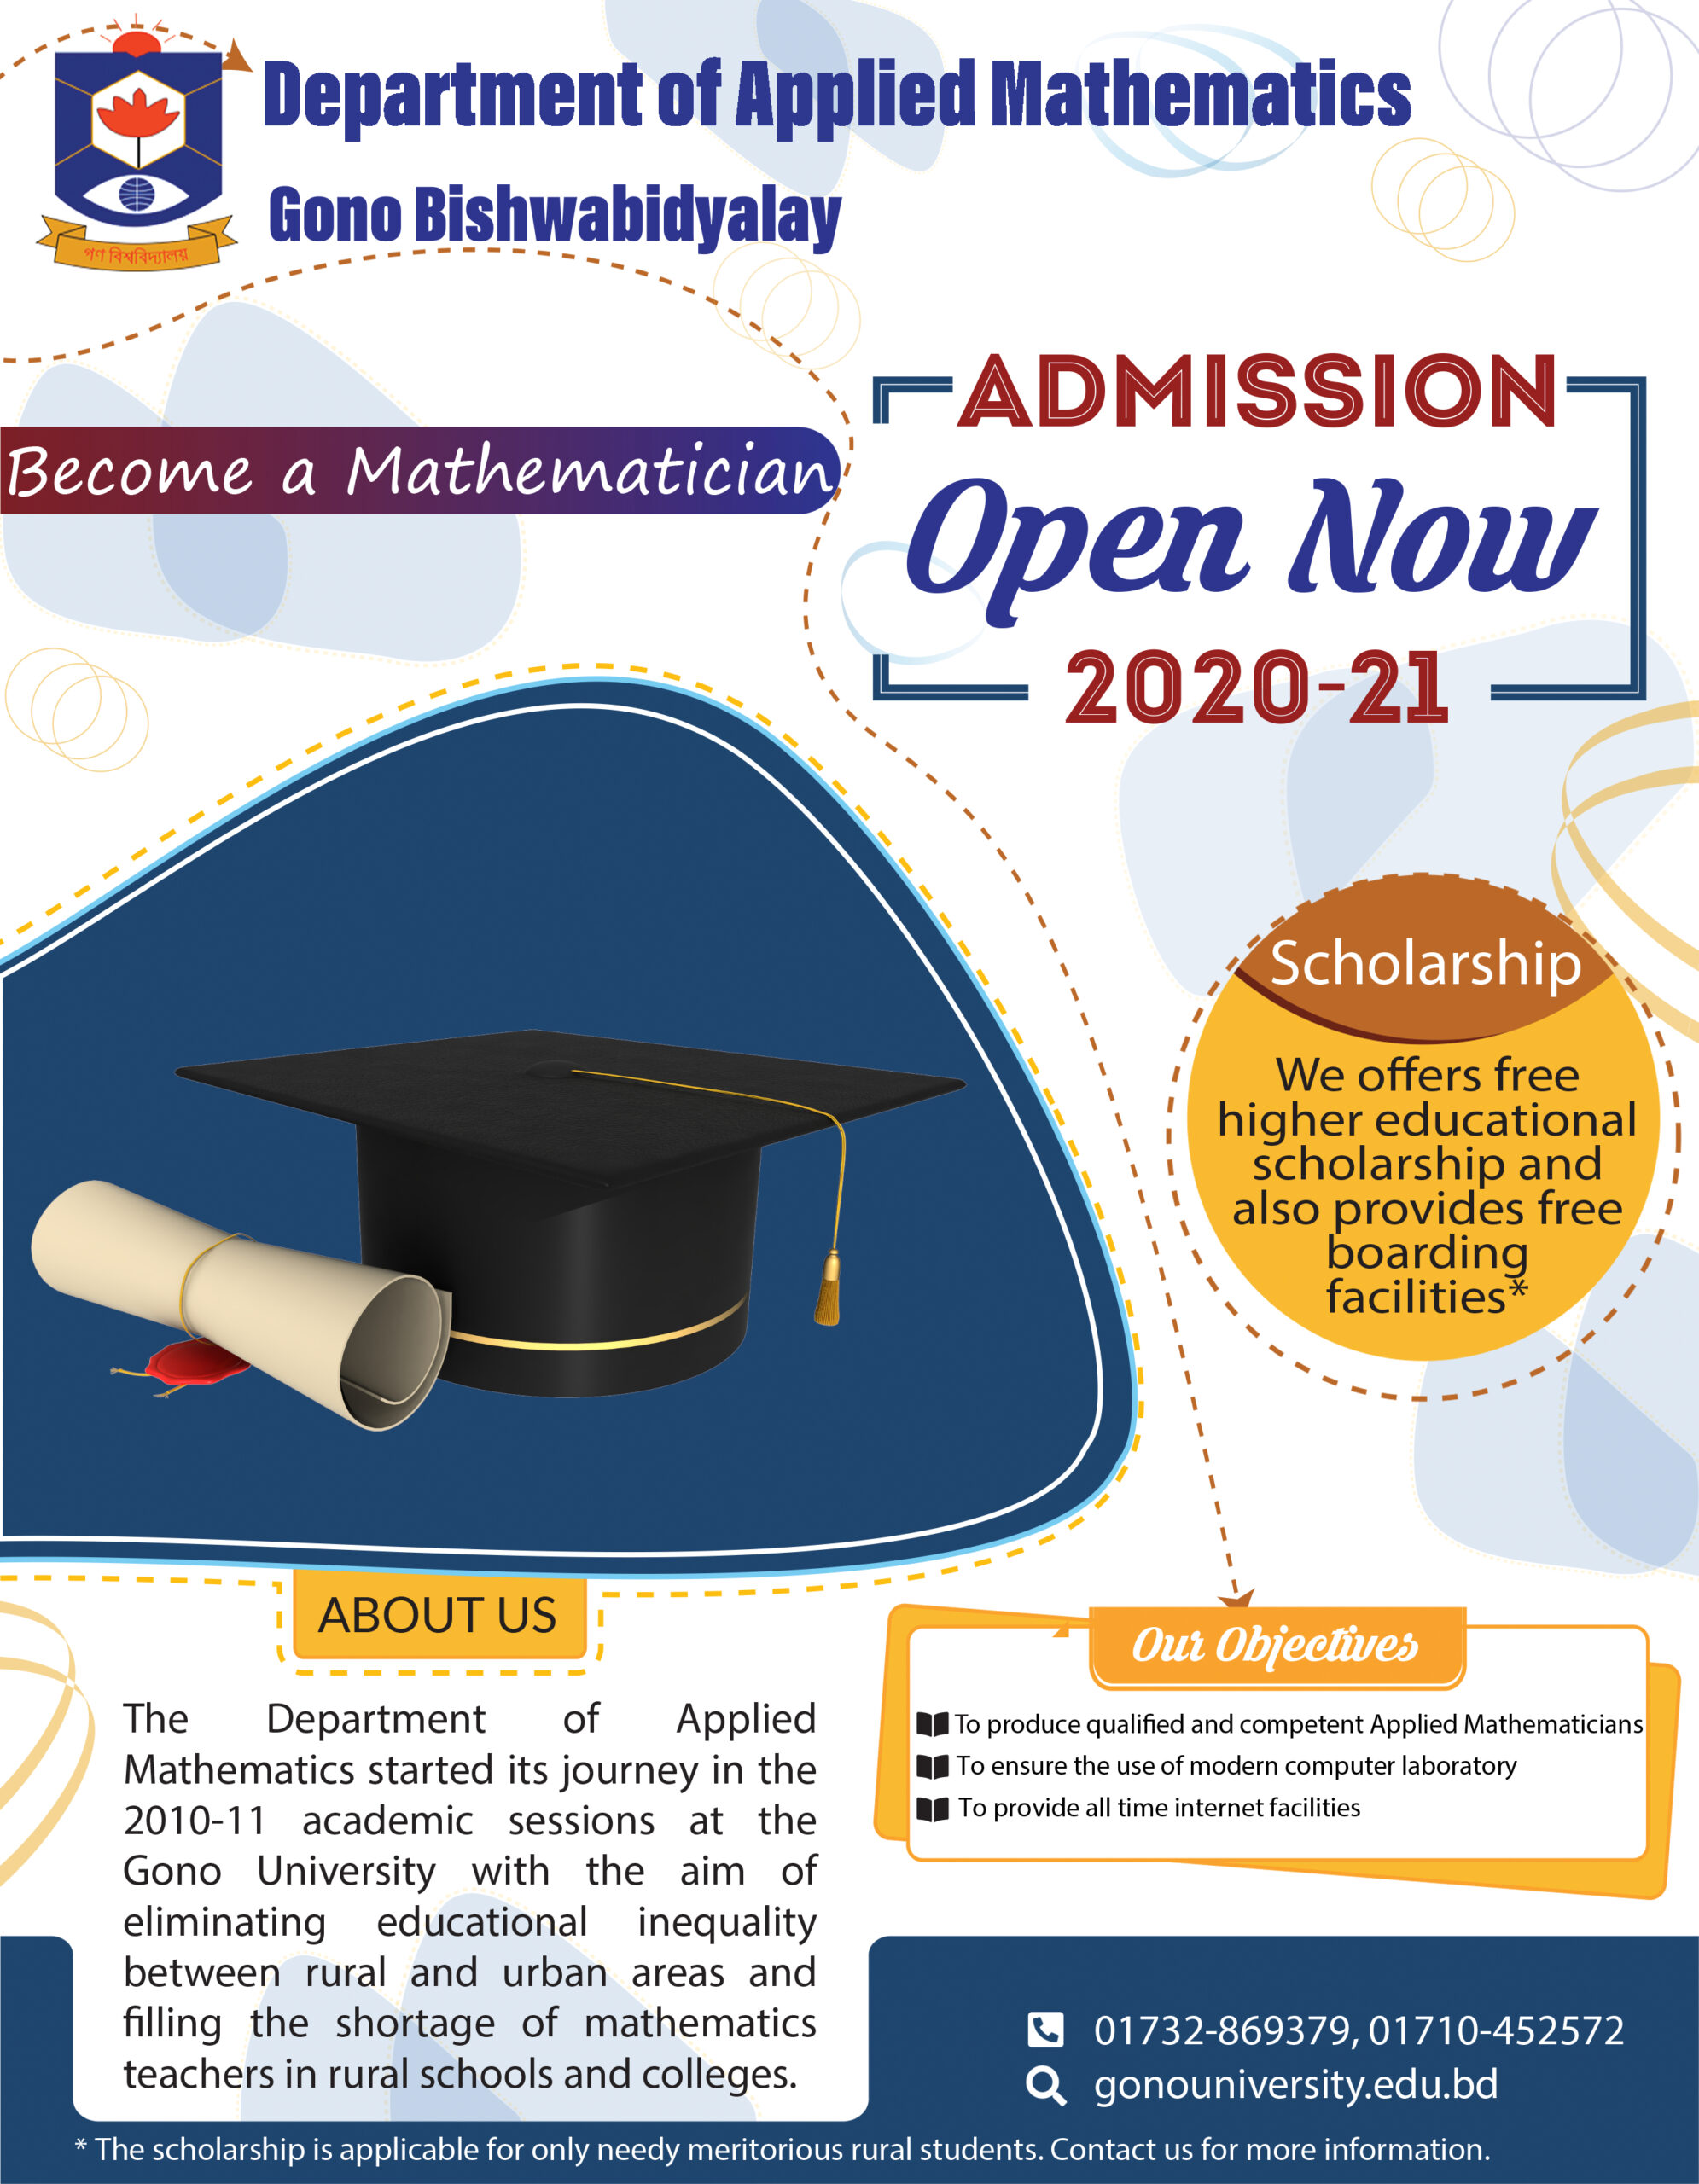 Admission Going On